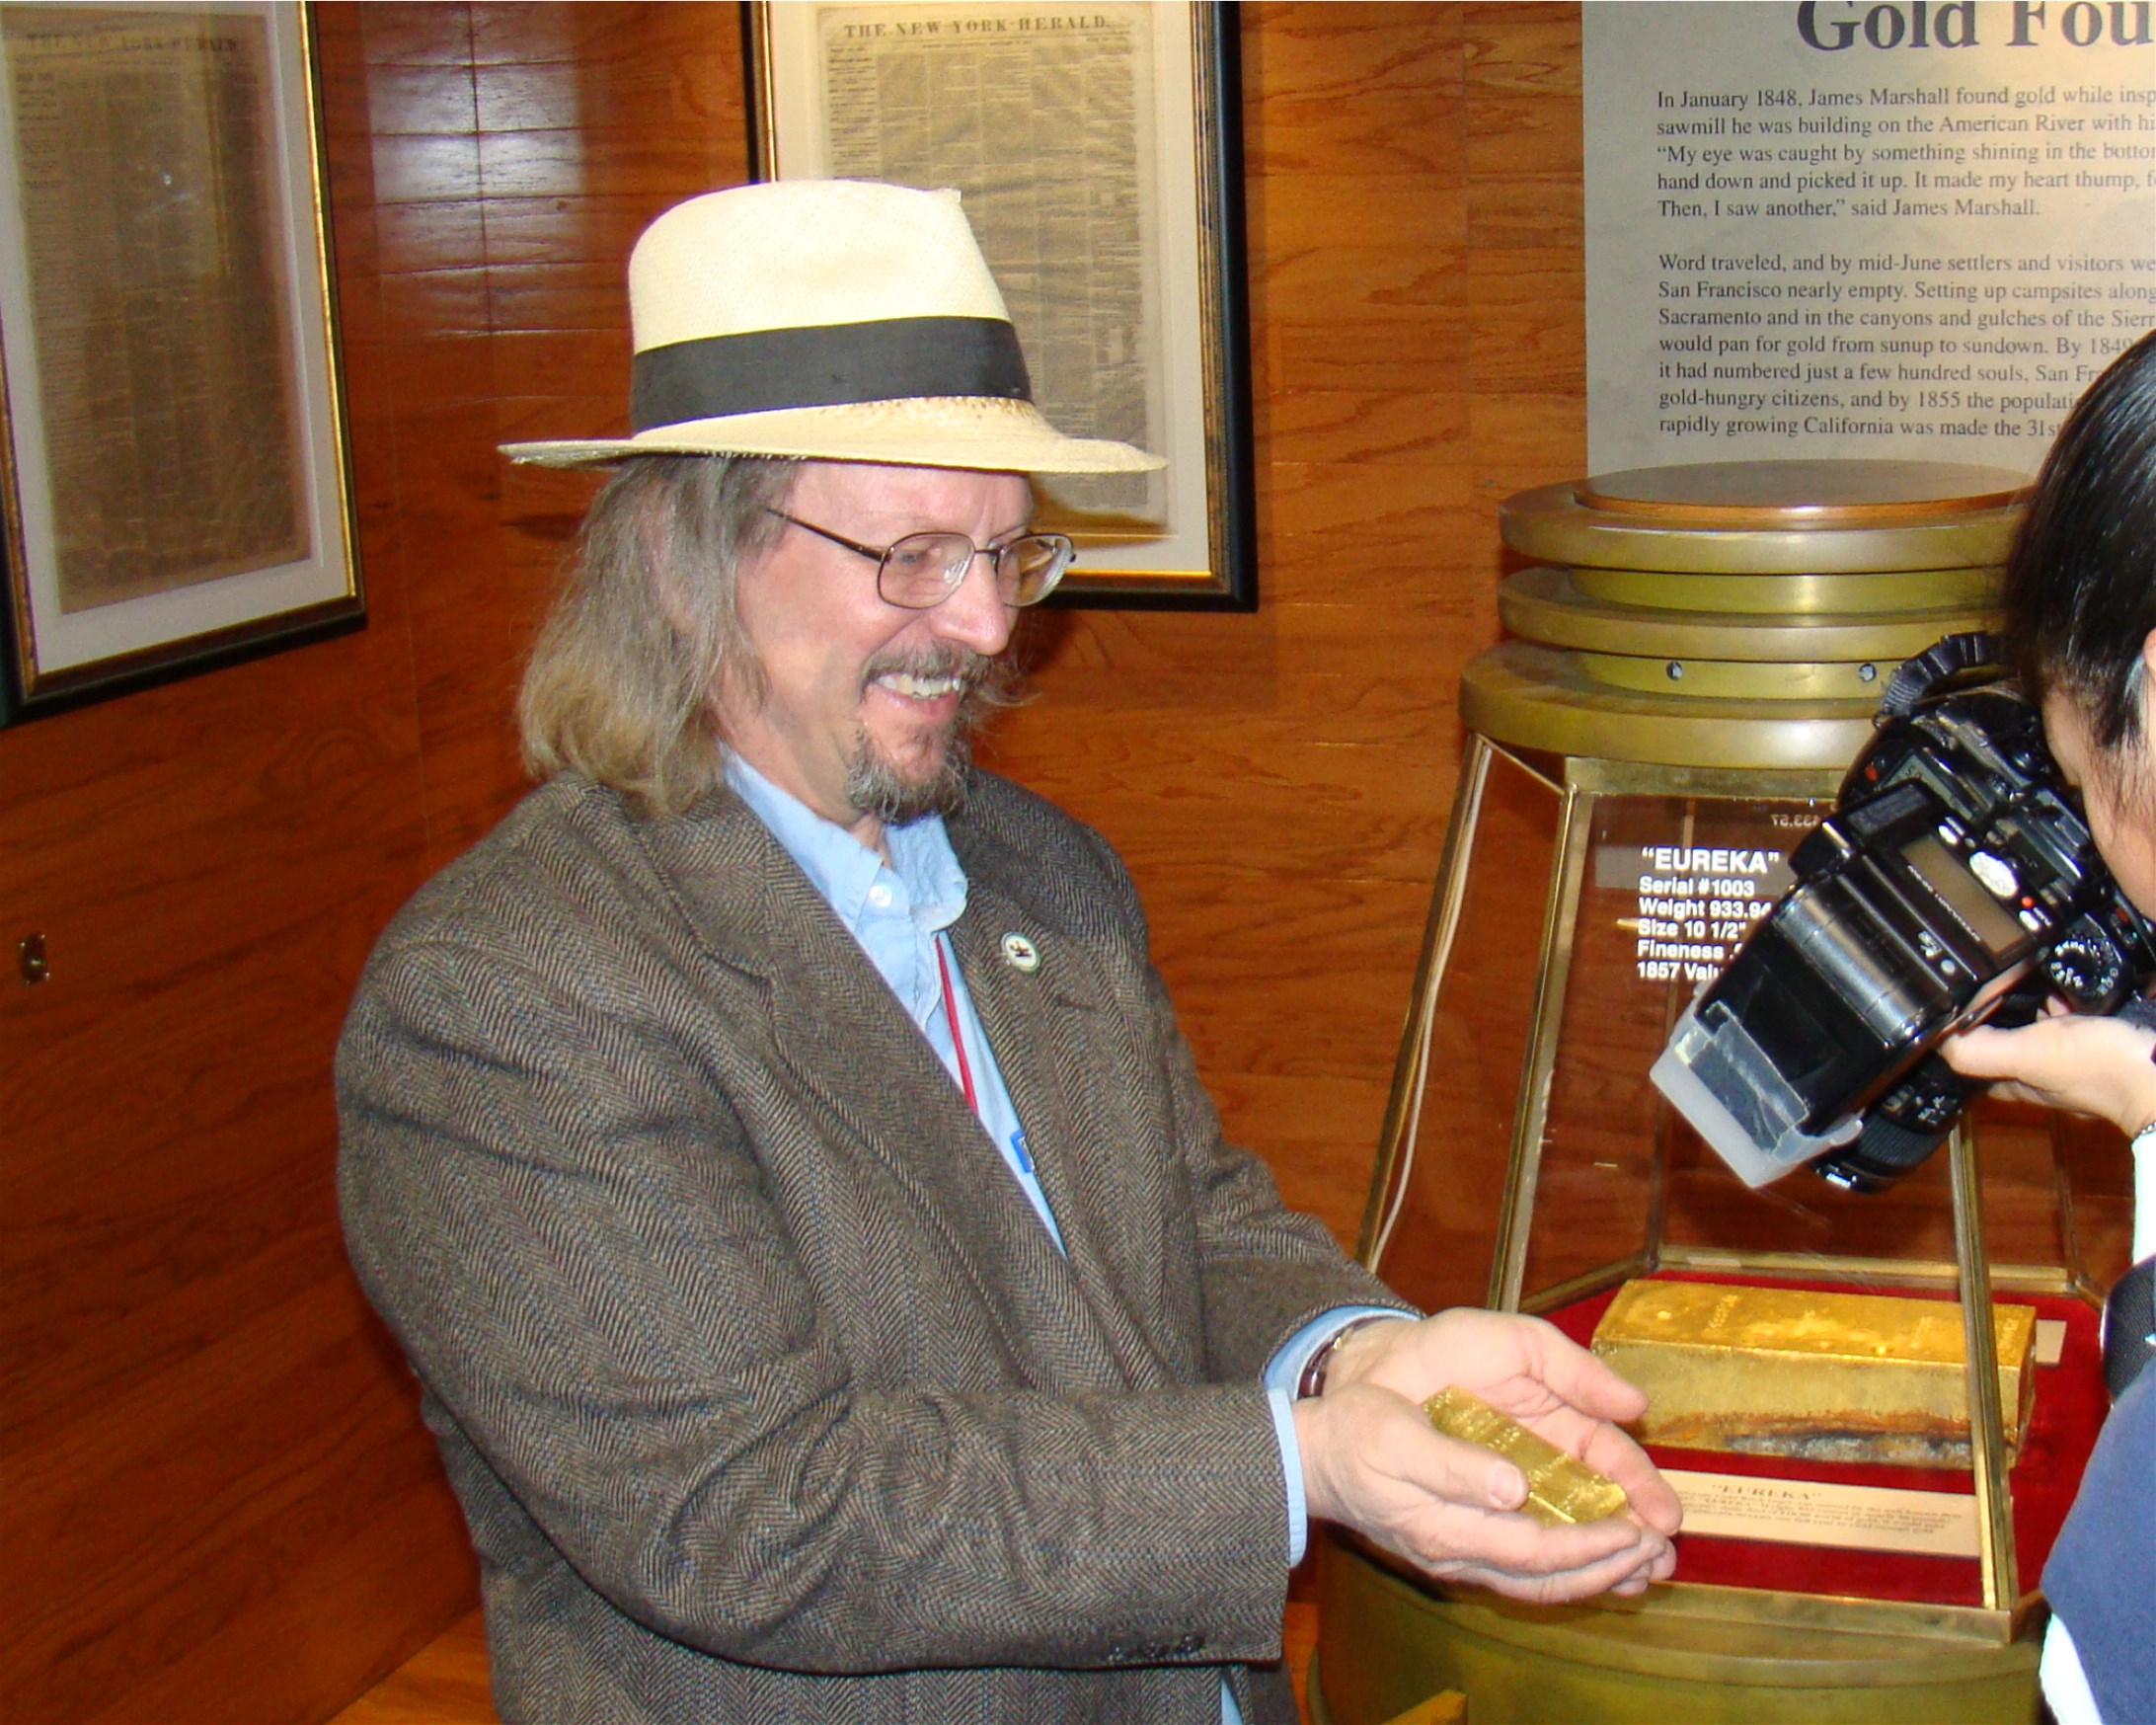 At the September 2013 Long Beach Expo, the public can meet Robert D. Evans, chief scientist on the mission that discovered and recovered America's greatest treasure from the 1857 sinking of the SS Central America, the fabled "Ship of Gold."